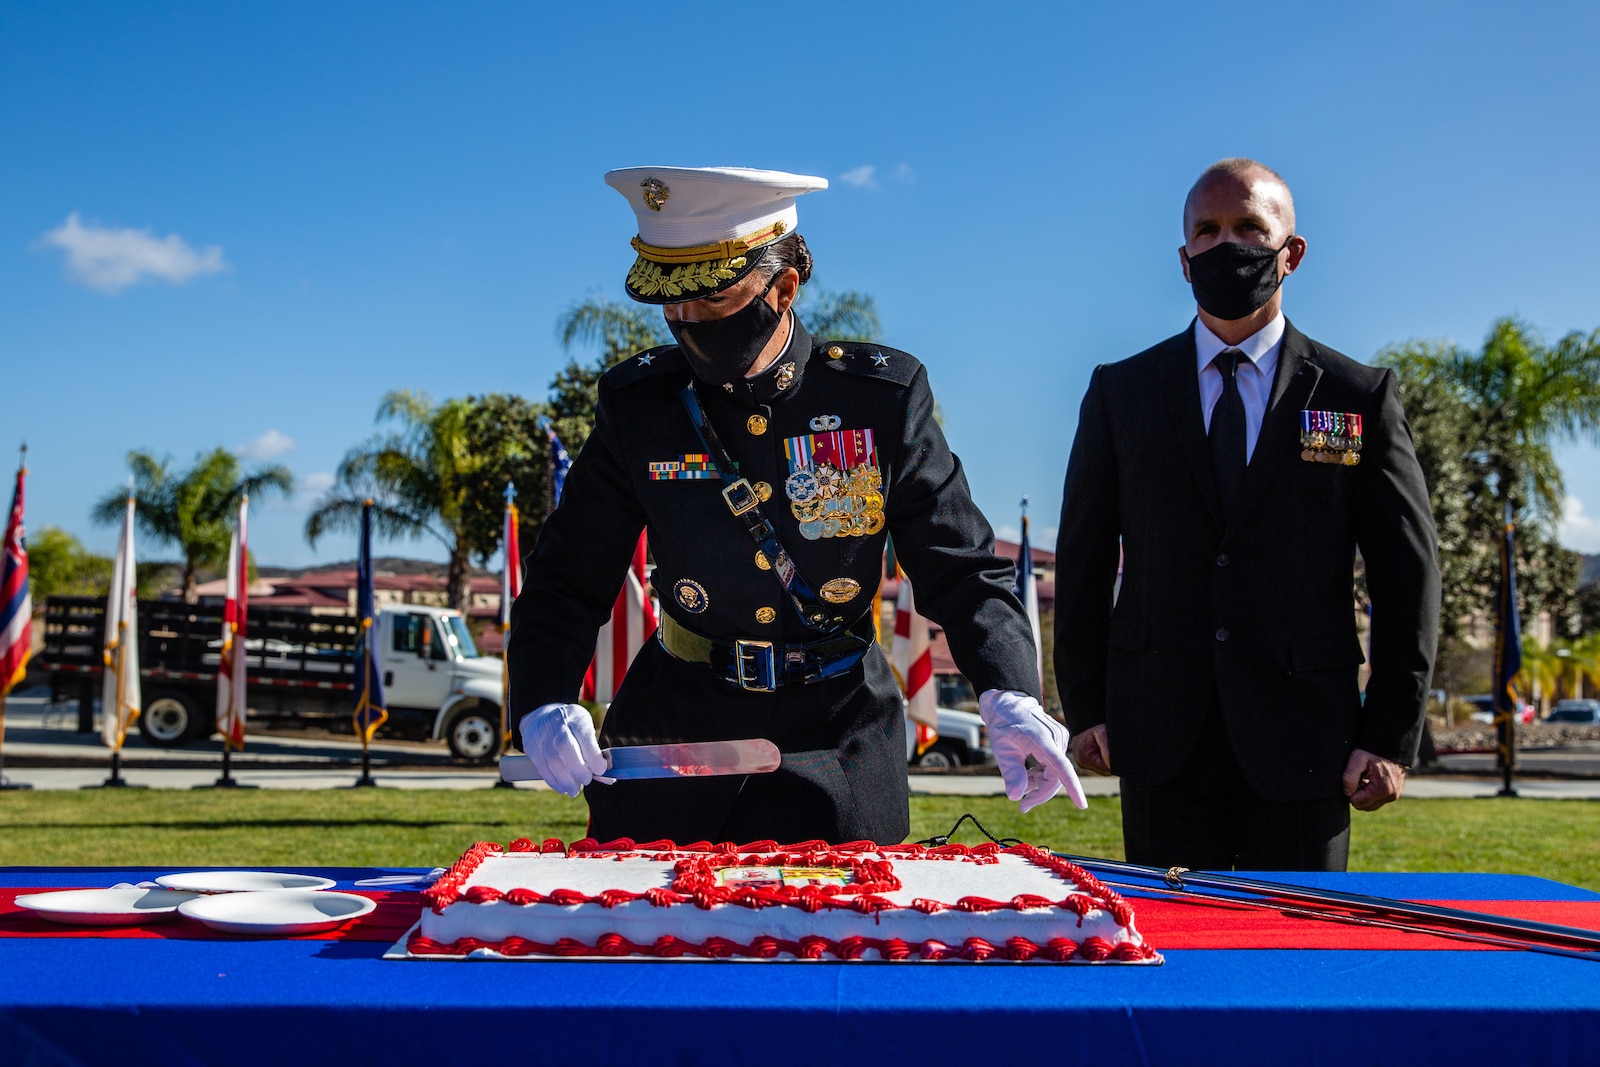 U.S. Marine Brig. Gen Bobbi Shea begins the passing of the cake during the unit’s cake cutting ceremony